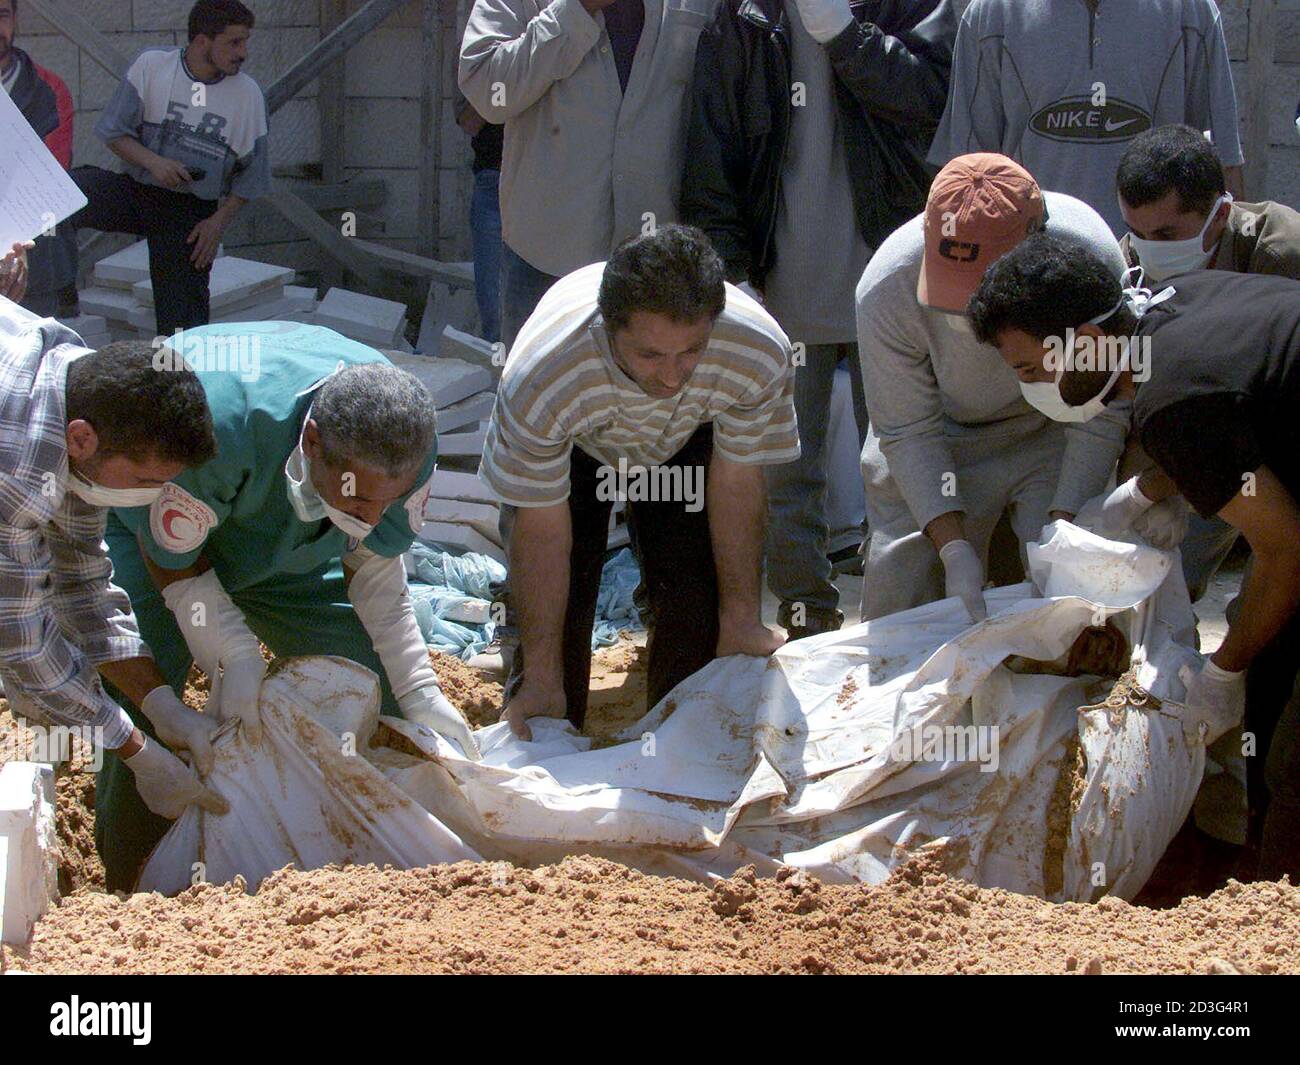 Palestinians bury dead bodies of Palestinians killed in Jenin refugee camp April 19, 2002.  [Thirty-five Palestinians swathed in white shrouds and some decked with purple flowers were buried on Friday in common graves in an olive grove on the edge of the Jenin refugee camp.  An Israeli army pullout earlier in the day brought no joy to residents of the camp, where so far 39 Palestinians have been confirmed killed in the worst violence of a West Bank blitz Israel launched after a spate of Palestinian suicide bombings] Stock Photo